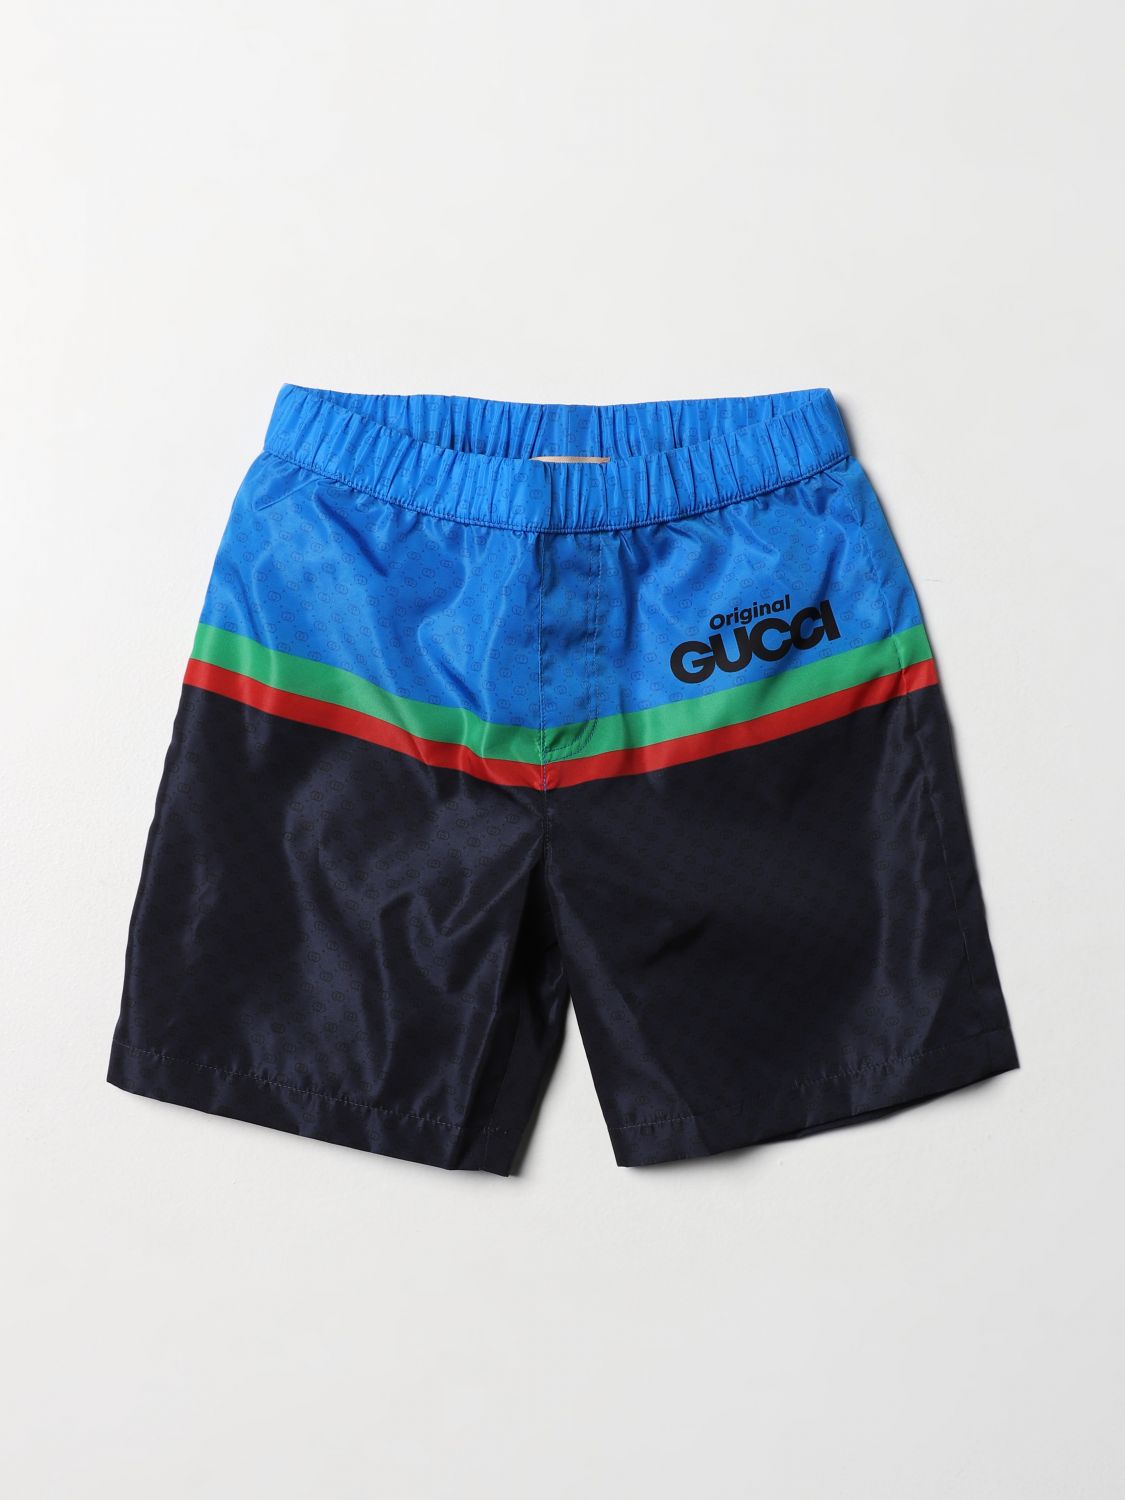 GUCCI: swim shorts with logo - Blue | Gucci swimsuit 554370XWAR8 online ...